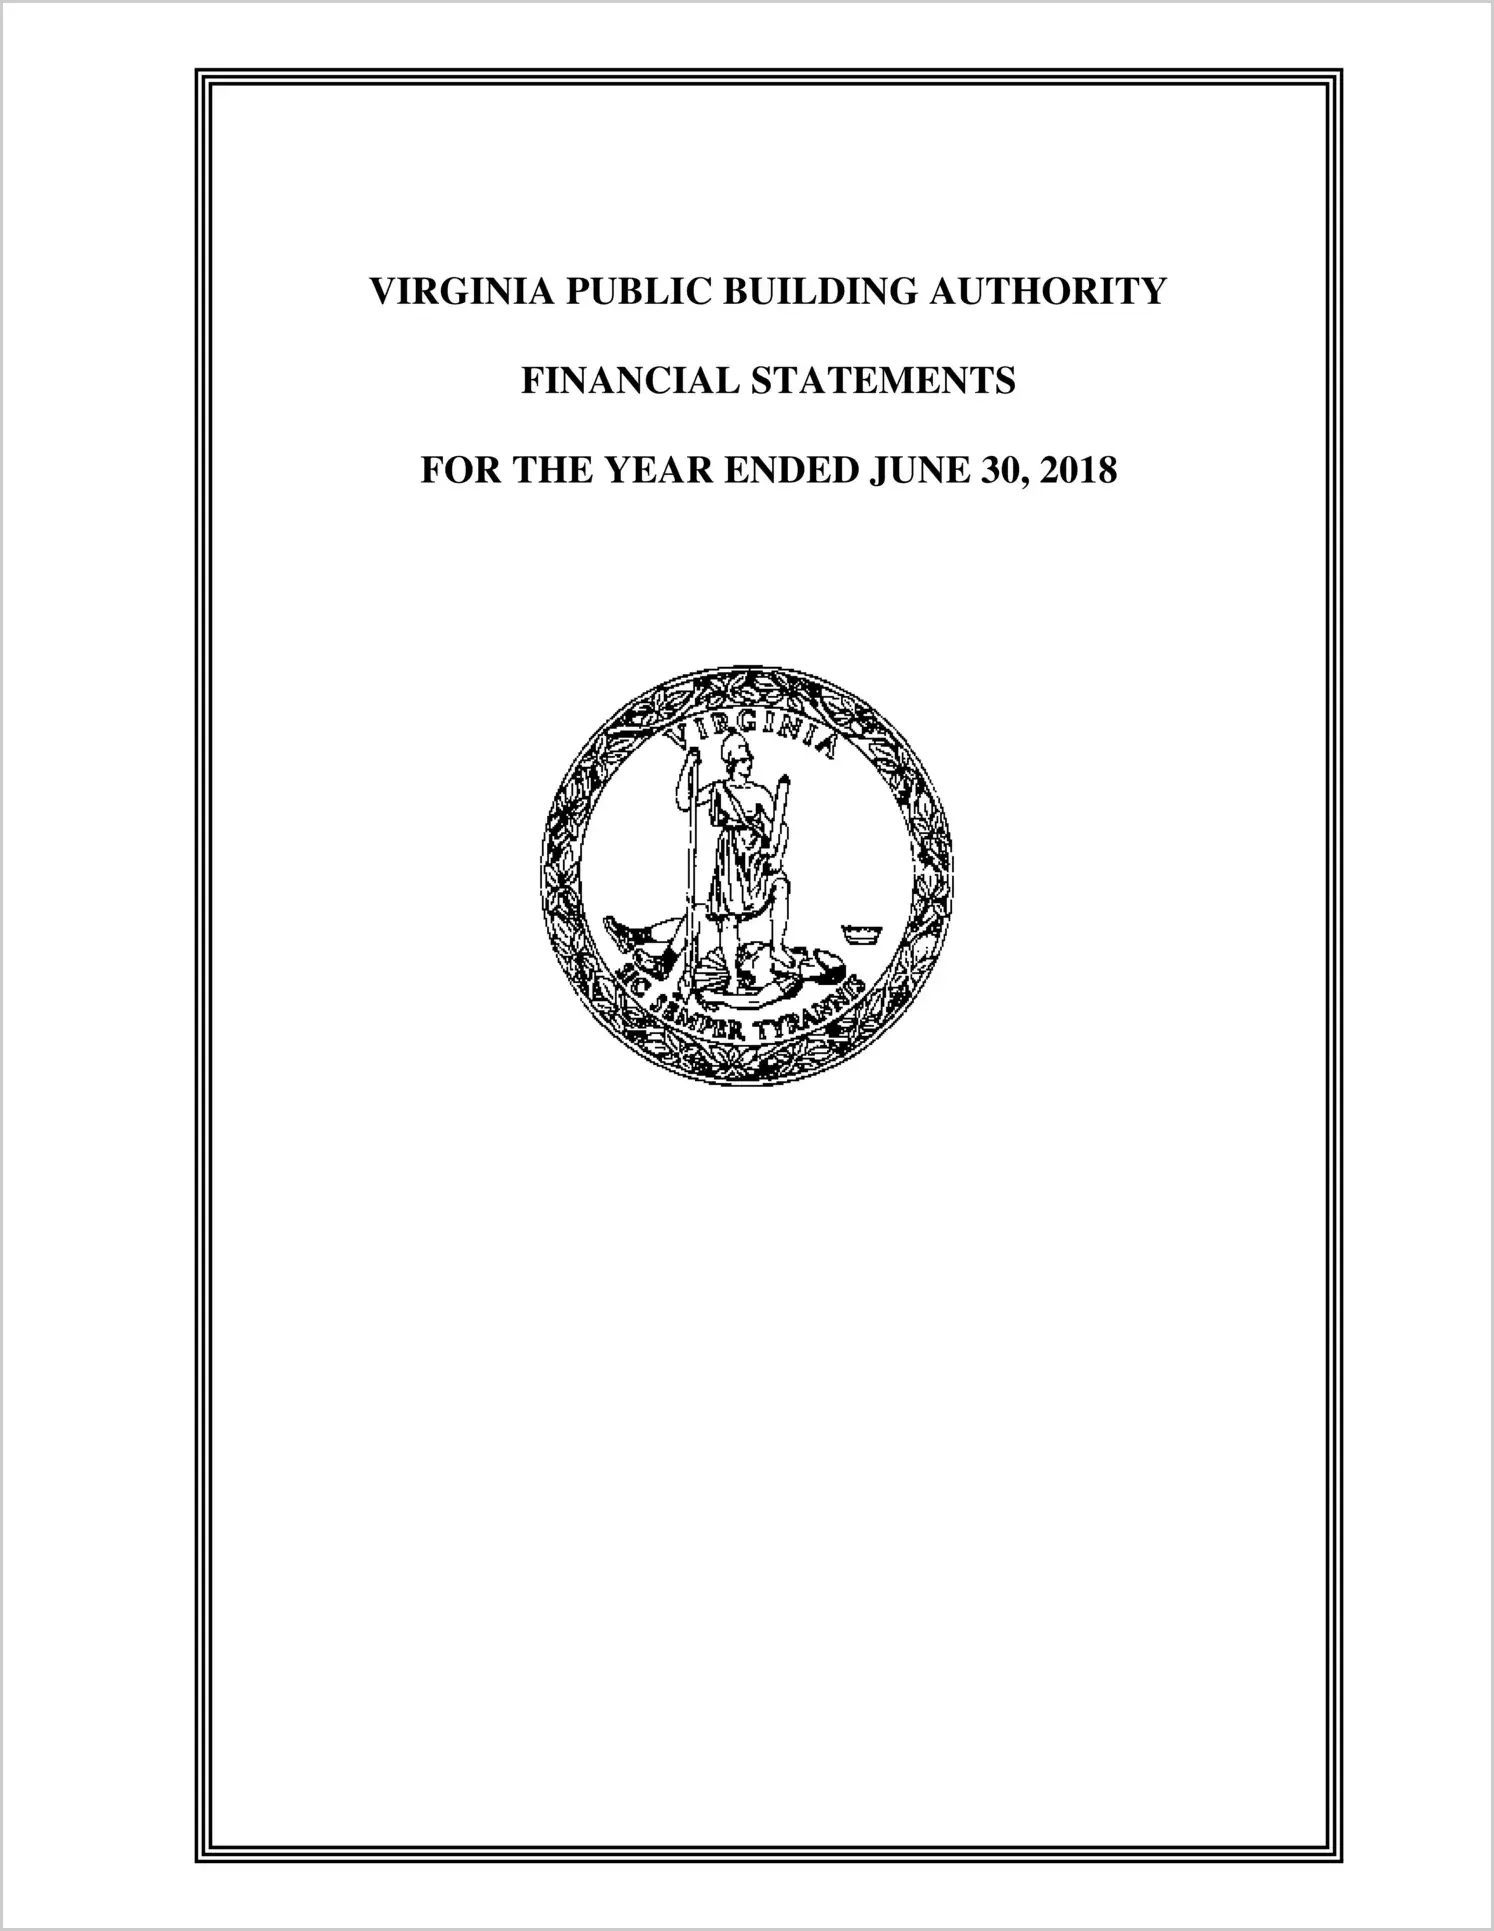 Virginia Public Building Authority Financial Statements for the year ended June 30, 2018